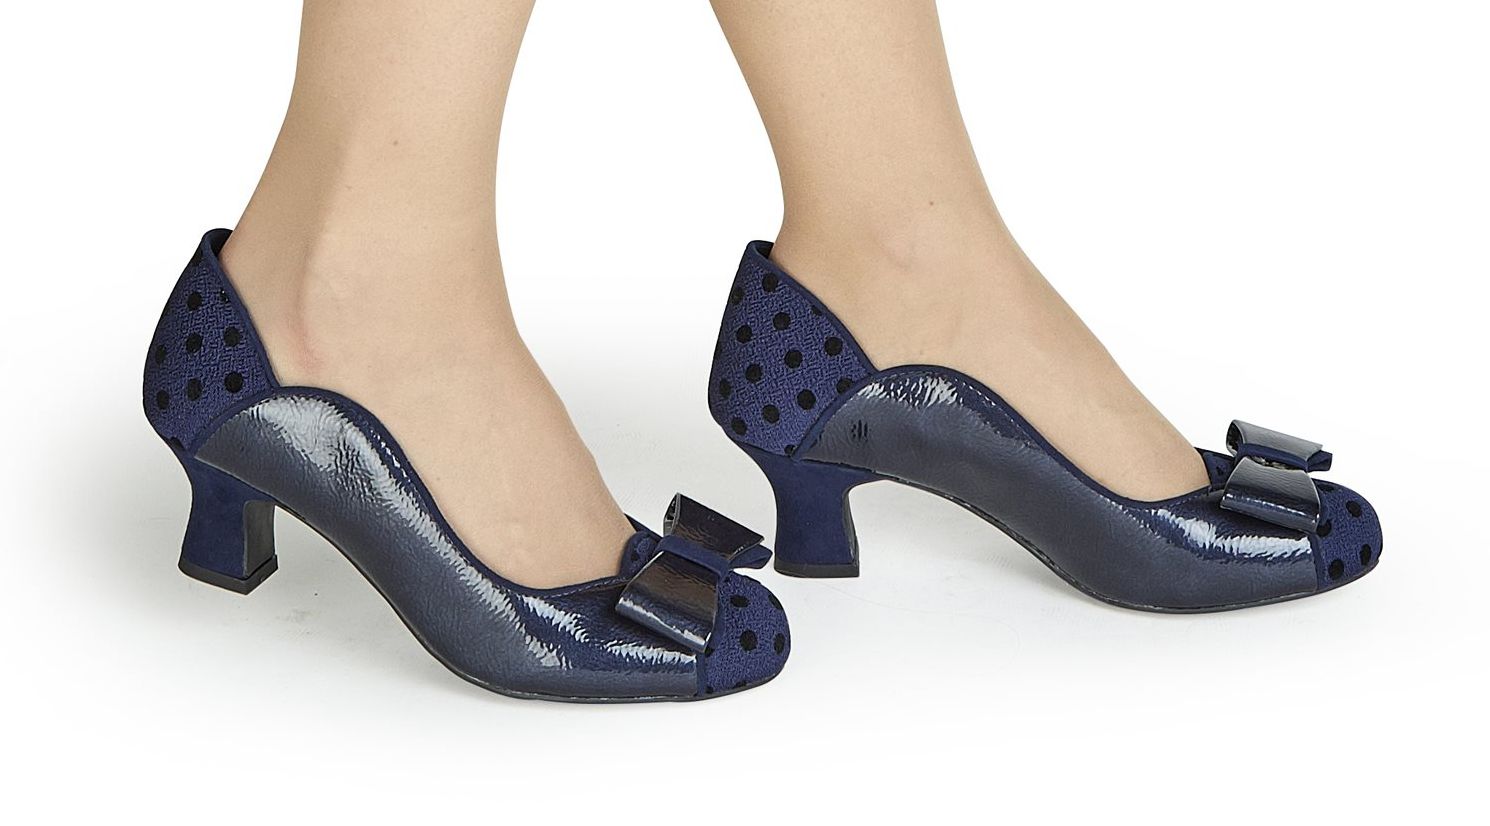 rs09311bbb_chaussures-escarpins-pin-up-retro-50-s-glam-chic-melody-navy